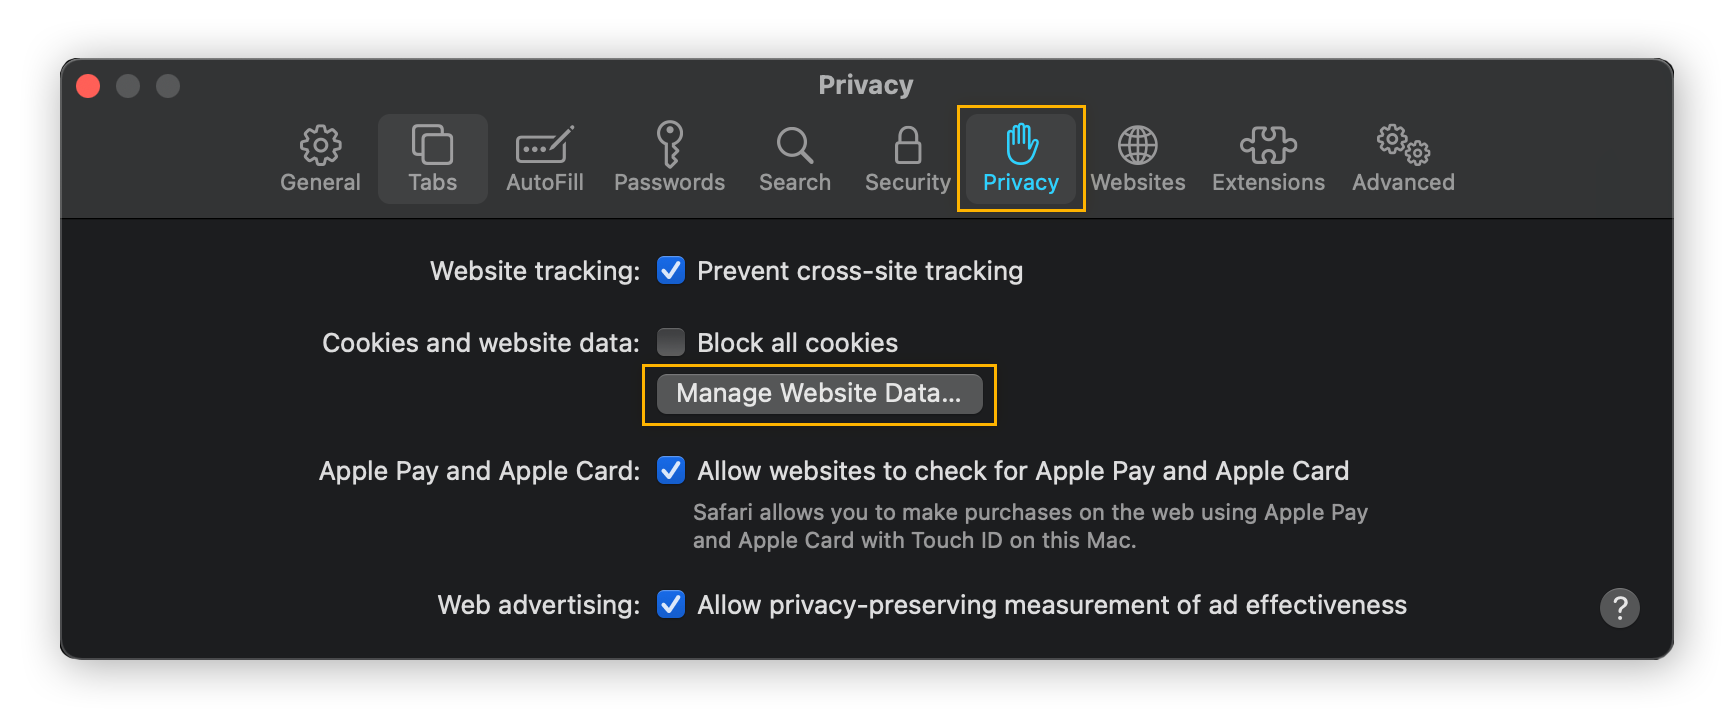 The Privacy settings in Safari for macOS